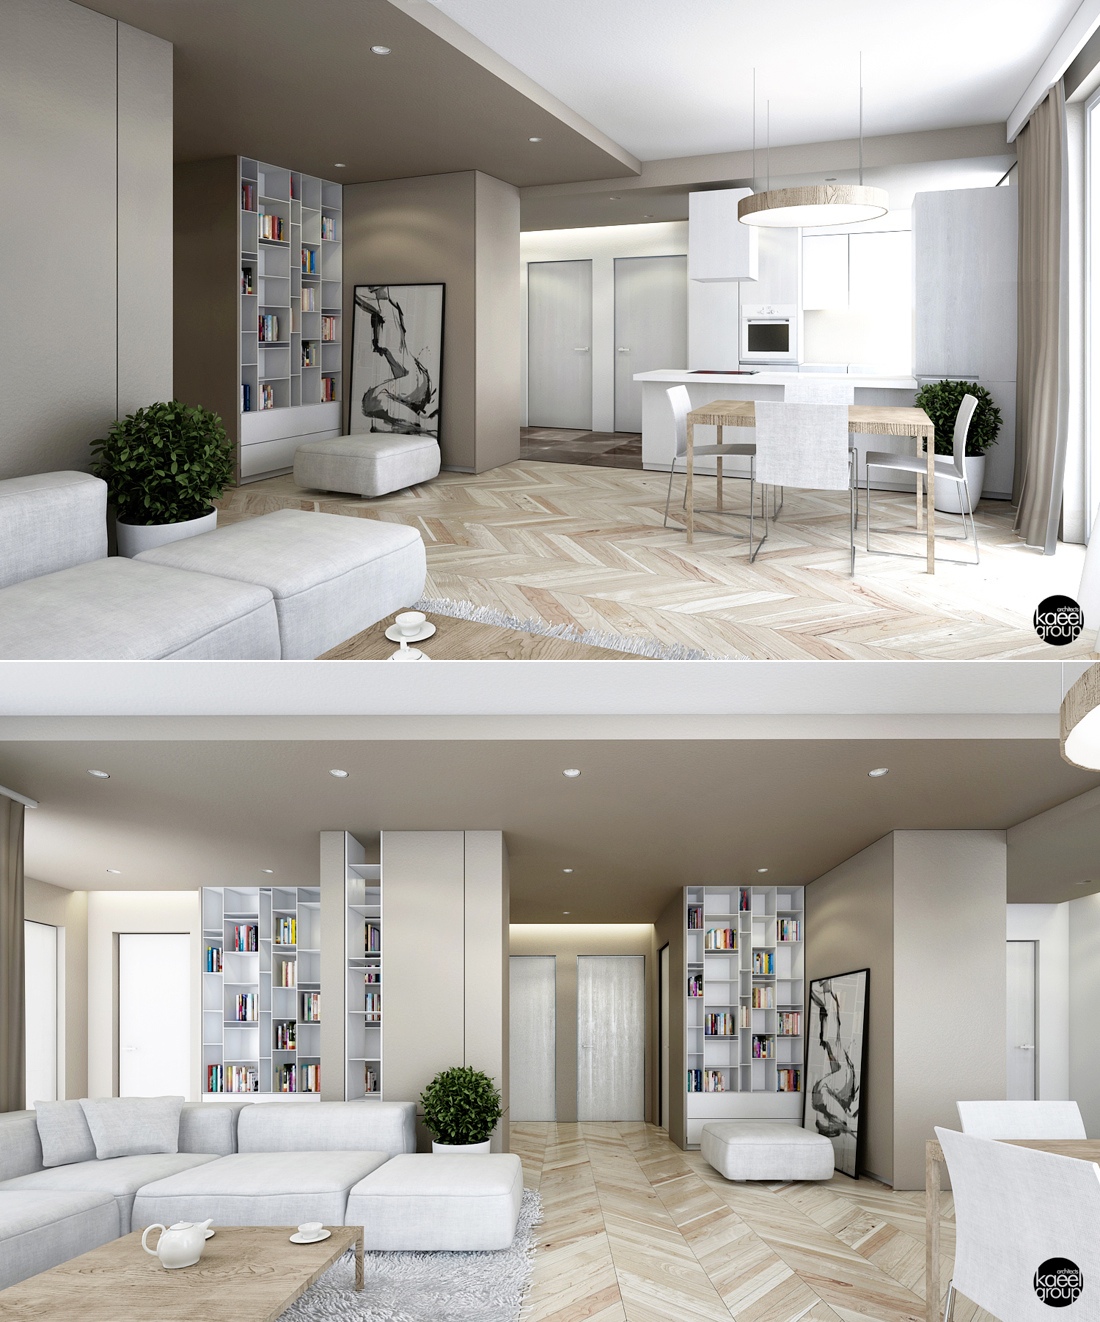 white modern apartment decor "width =" 1100 "height =" 1322 "srcset =" https://mileray.com/wp-content/uploads/2020/05/1588515702_35_Variety-of-Open-Plan-Living-Room-Designs-With-Luxury-Interior.jpeg 1100w, https://mileray.com / wp-content / uploads / 2016/09 / Kaeel-Group-250x300.jpeg 250w, https://mileray.com/wp-content/uploads/2016/09/Kaeel-Group-768x923.jpeg 768w, https: / / mileray.com/wp-content/uploads/2016/09/Kaeel-Group-852x1024.jpeg 852w, https://mileray.com/wp-content/uploads/2016/09/Kaeel-Group-696x836.jpeg 696w, https://mileray.com/wp-content/uploads/2016/09/Kaeel-Group-1068x1284.jpeg 1068w, https://mileray.com/wp-content/uploads/2016/09/Kaeel-Group- 349x420 .jpeg 349w "sizes =" (maximum width: 1100px) 100vw, 1100px